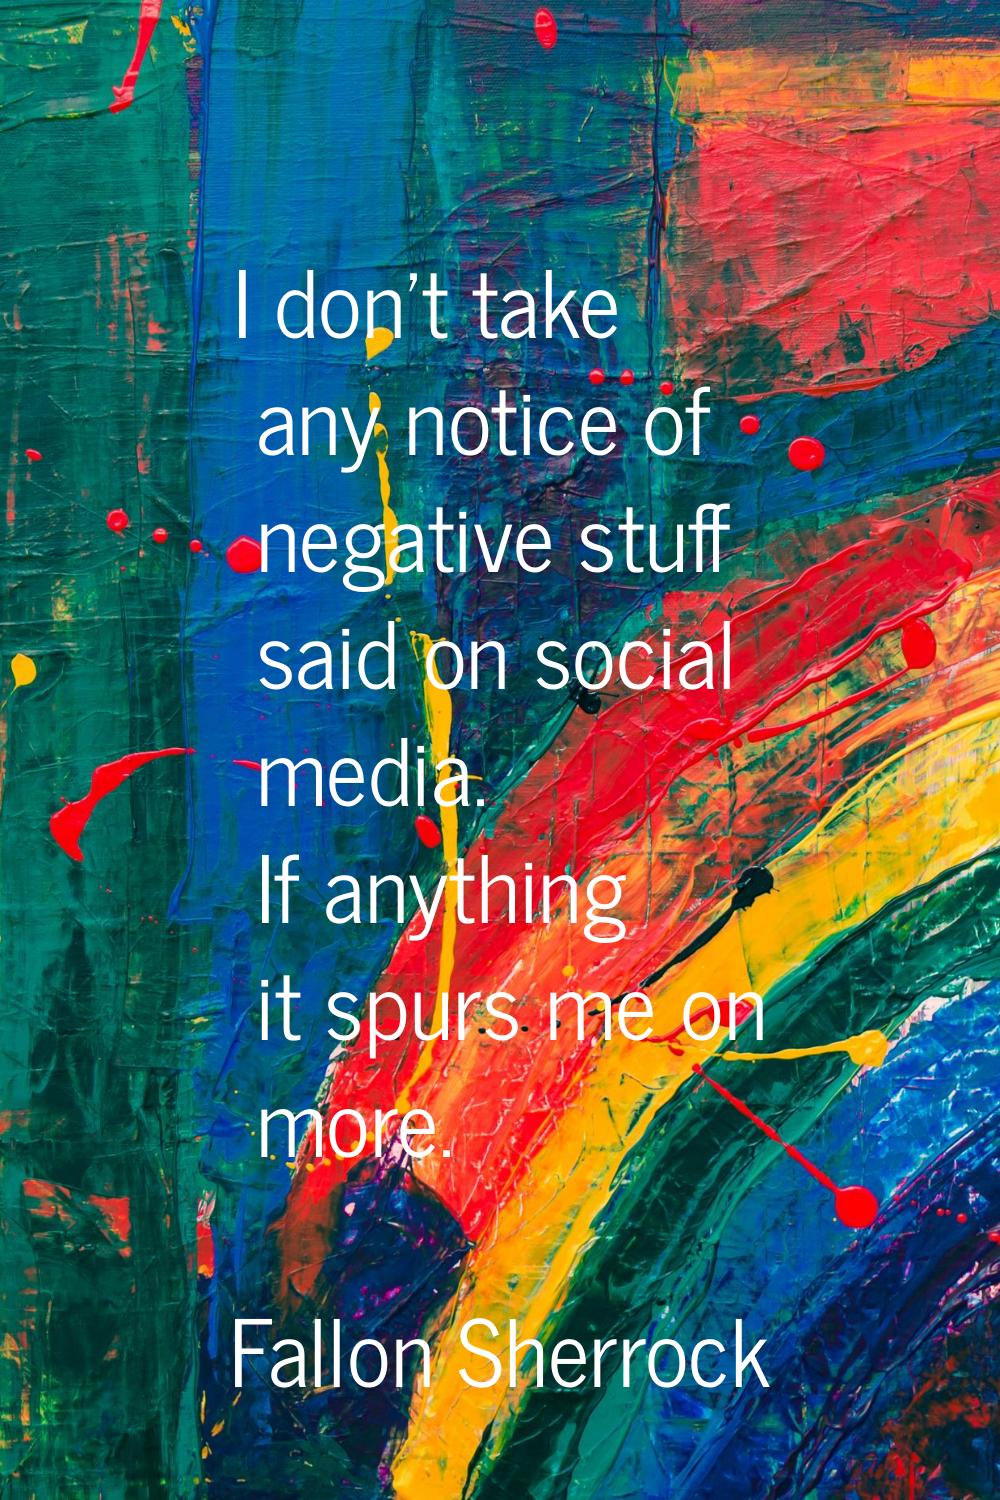 I don't take any notice of negative stuff said on social media. If anything it spurs me on more.